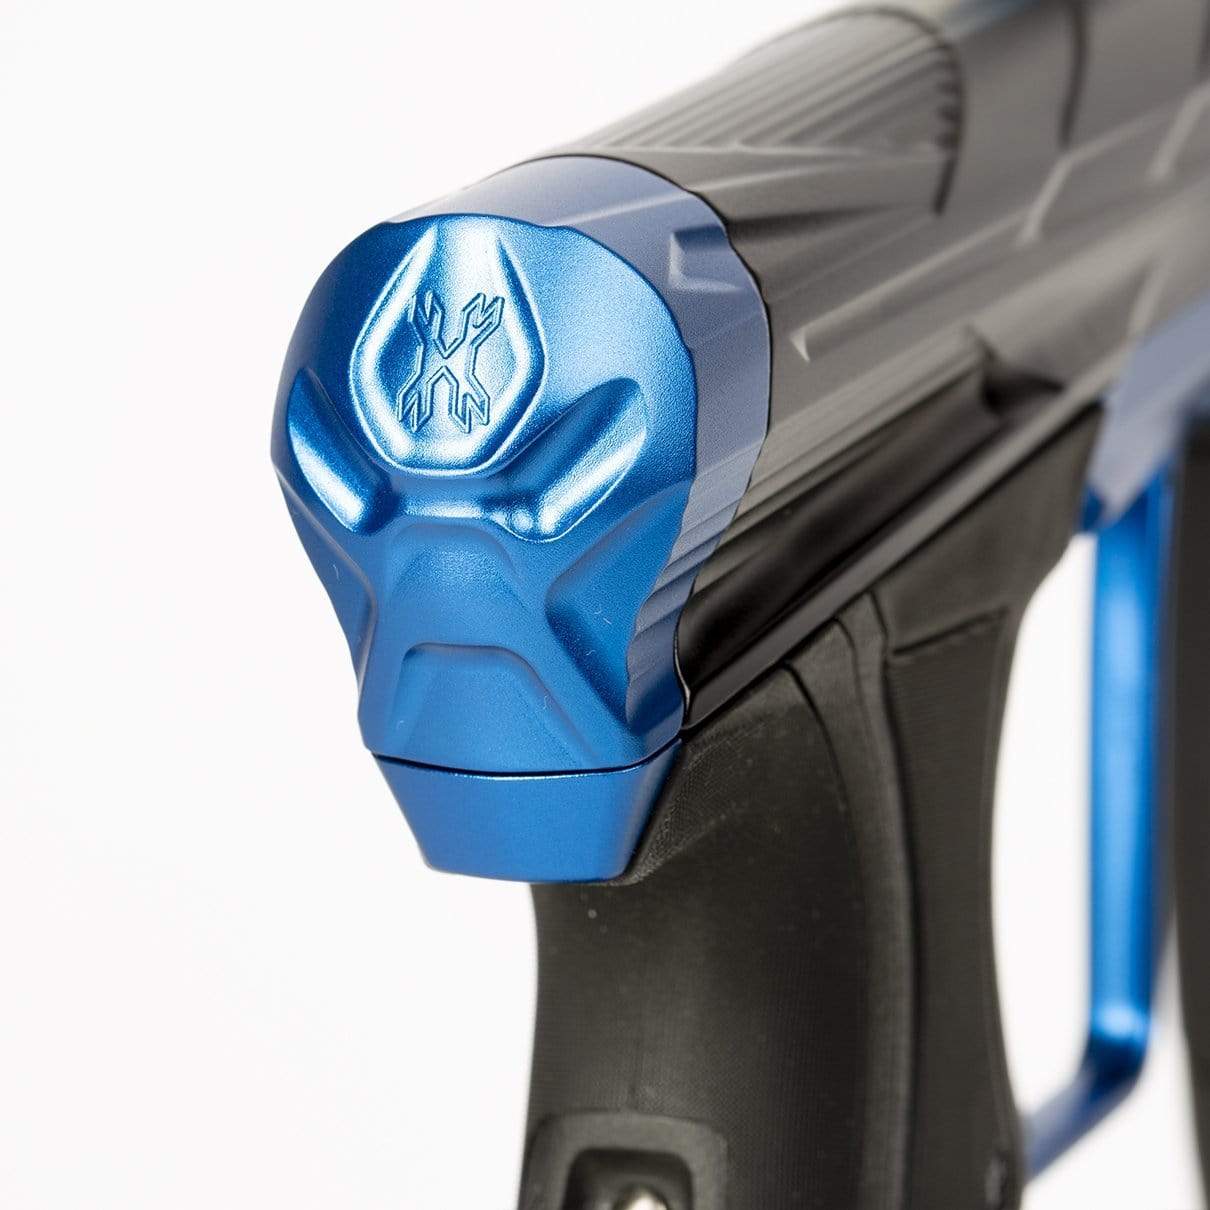 Invader CS2 Pro - Sapphire - Dust Black/ Blue - Eminent Paintball And Airsoft